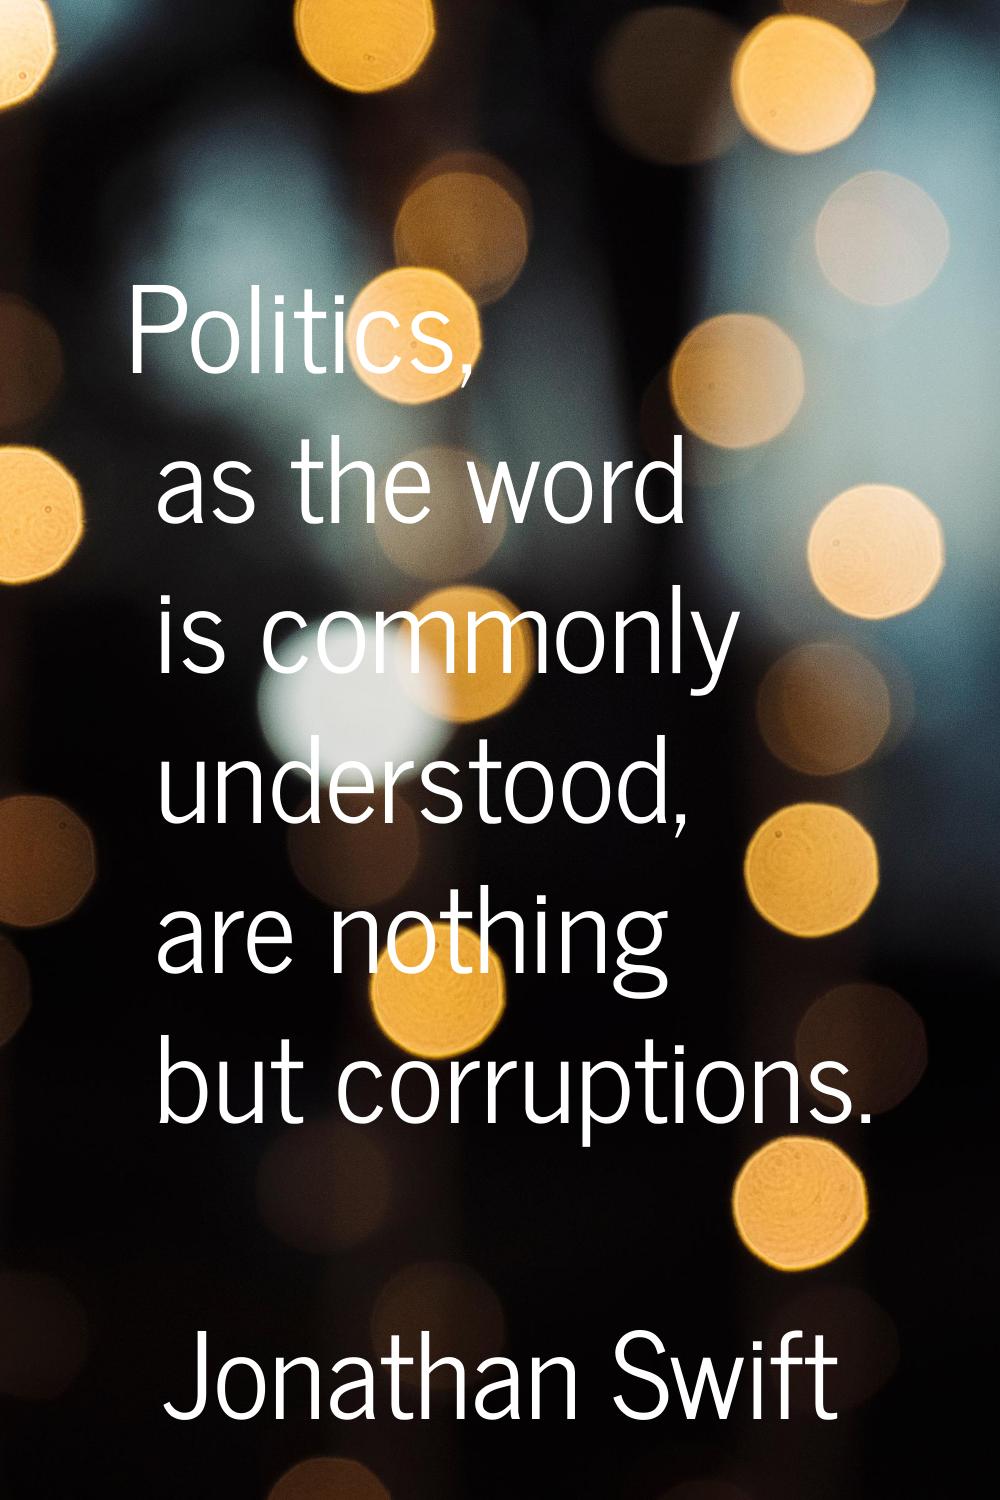 Politics, as the word is commonly understood, are nothing but corruptions.